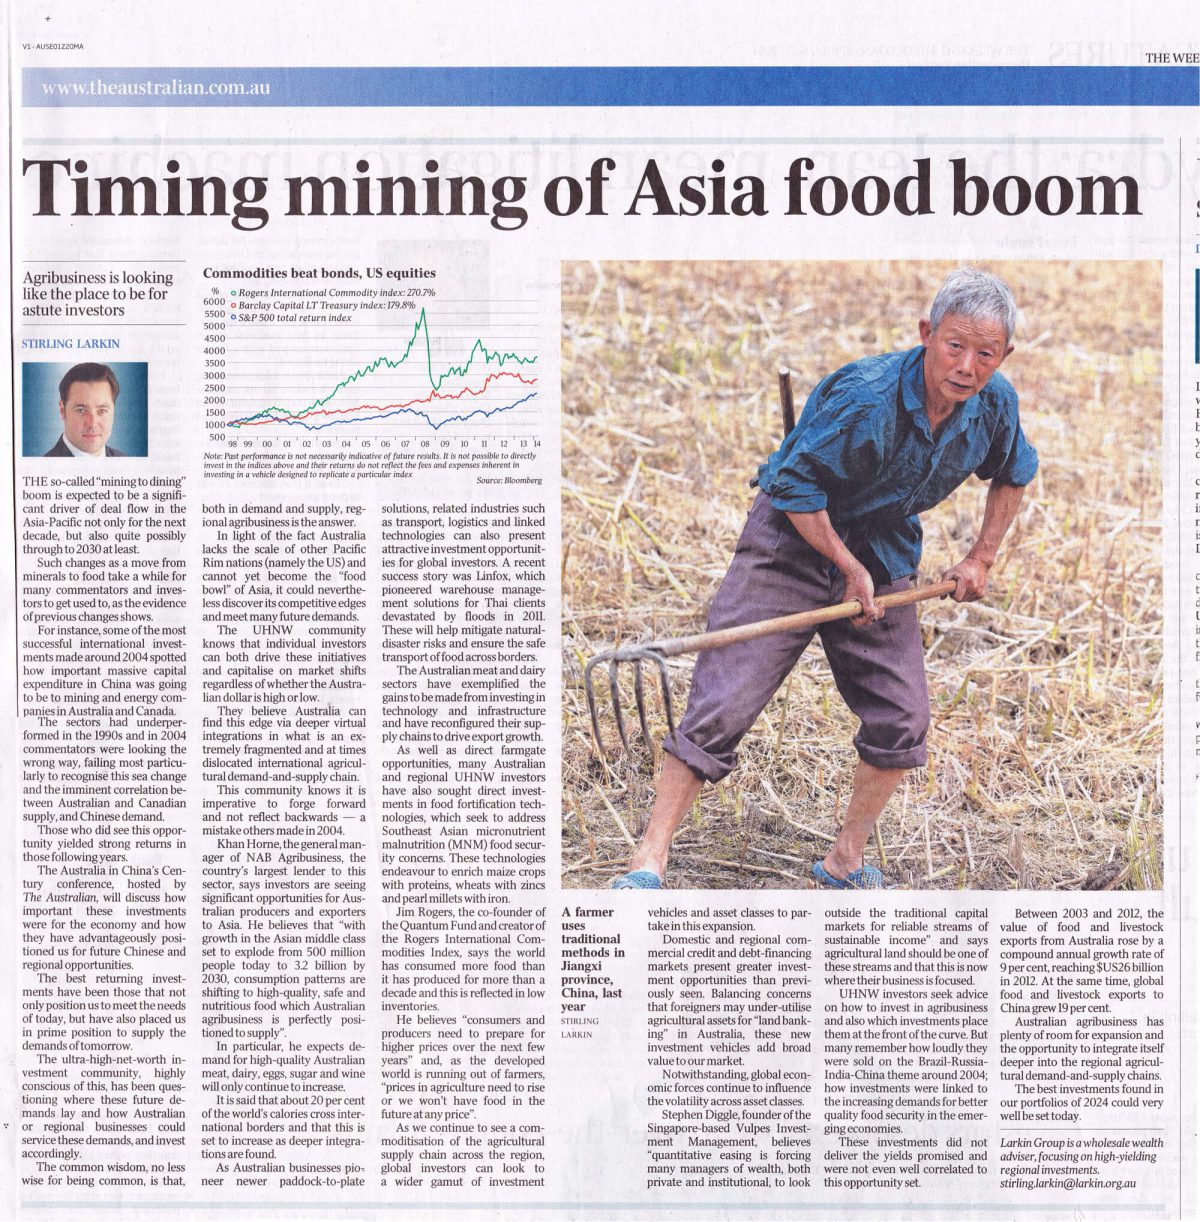 australian standfirst discusses mining and commodities in asia 2014 in the australian newspaper